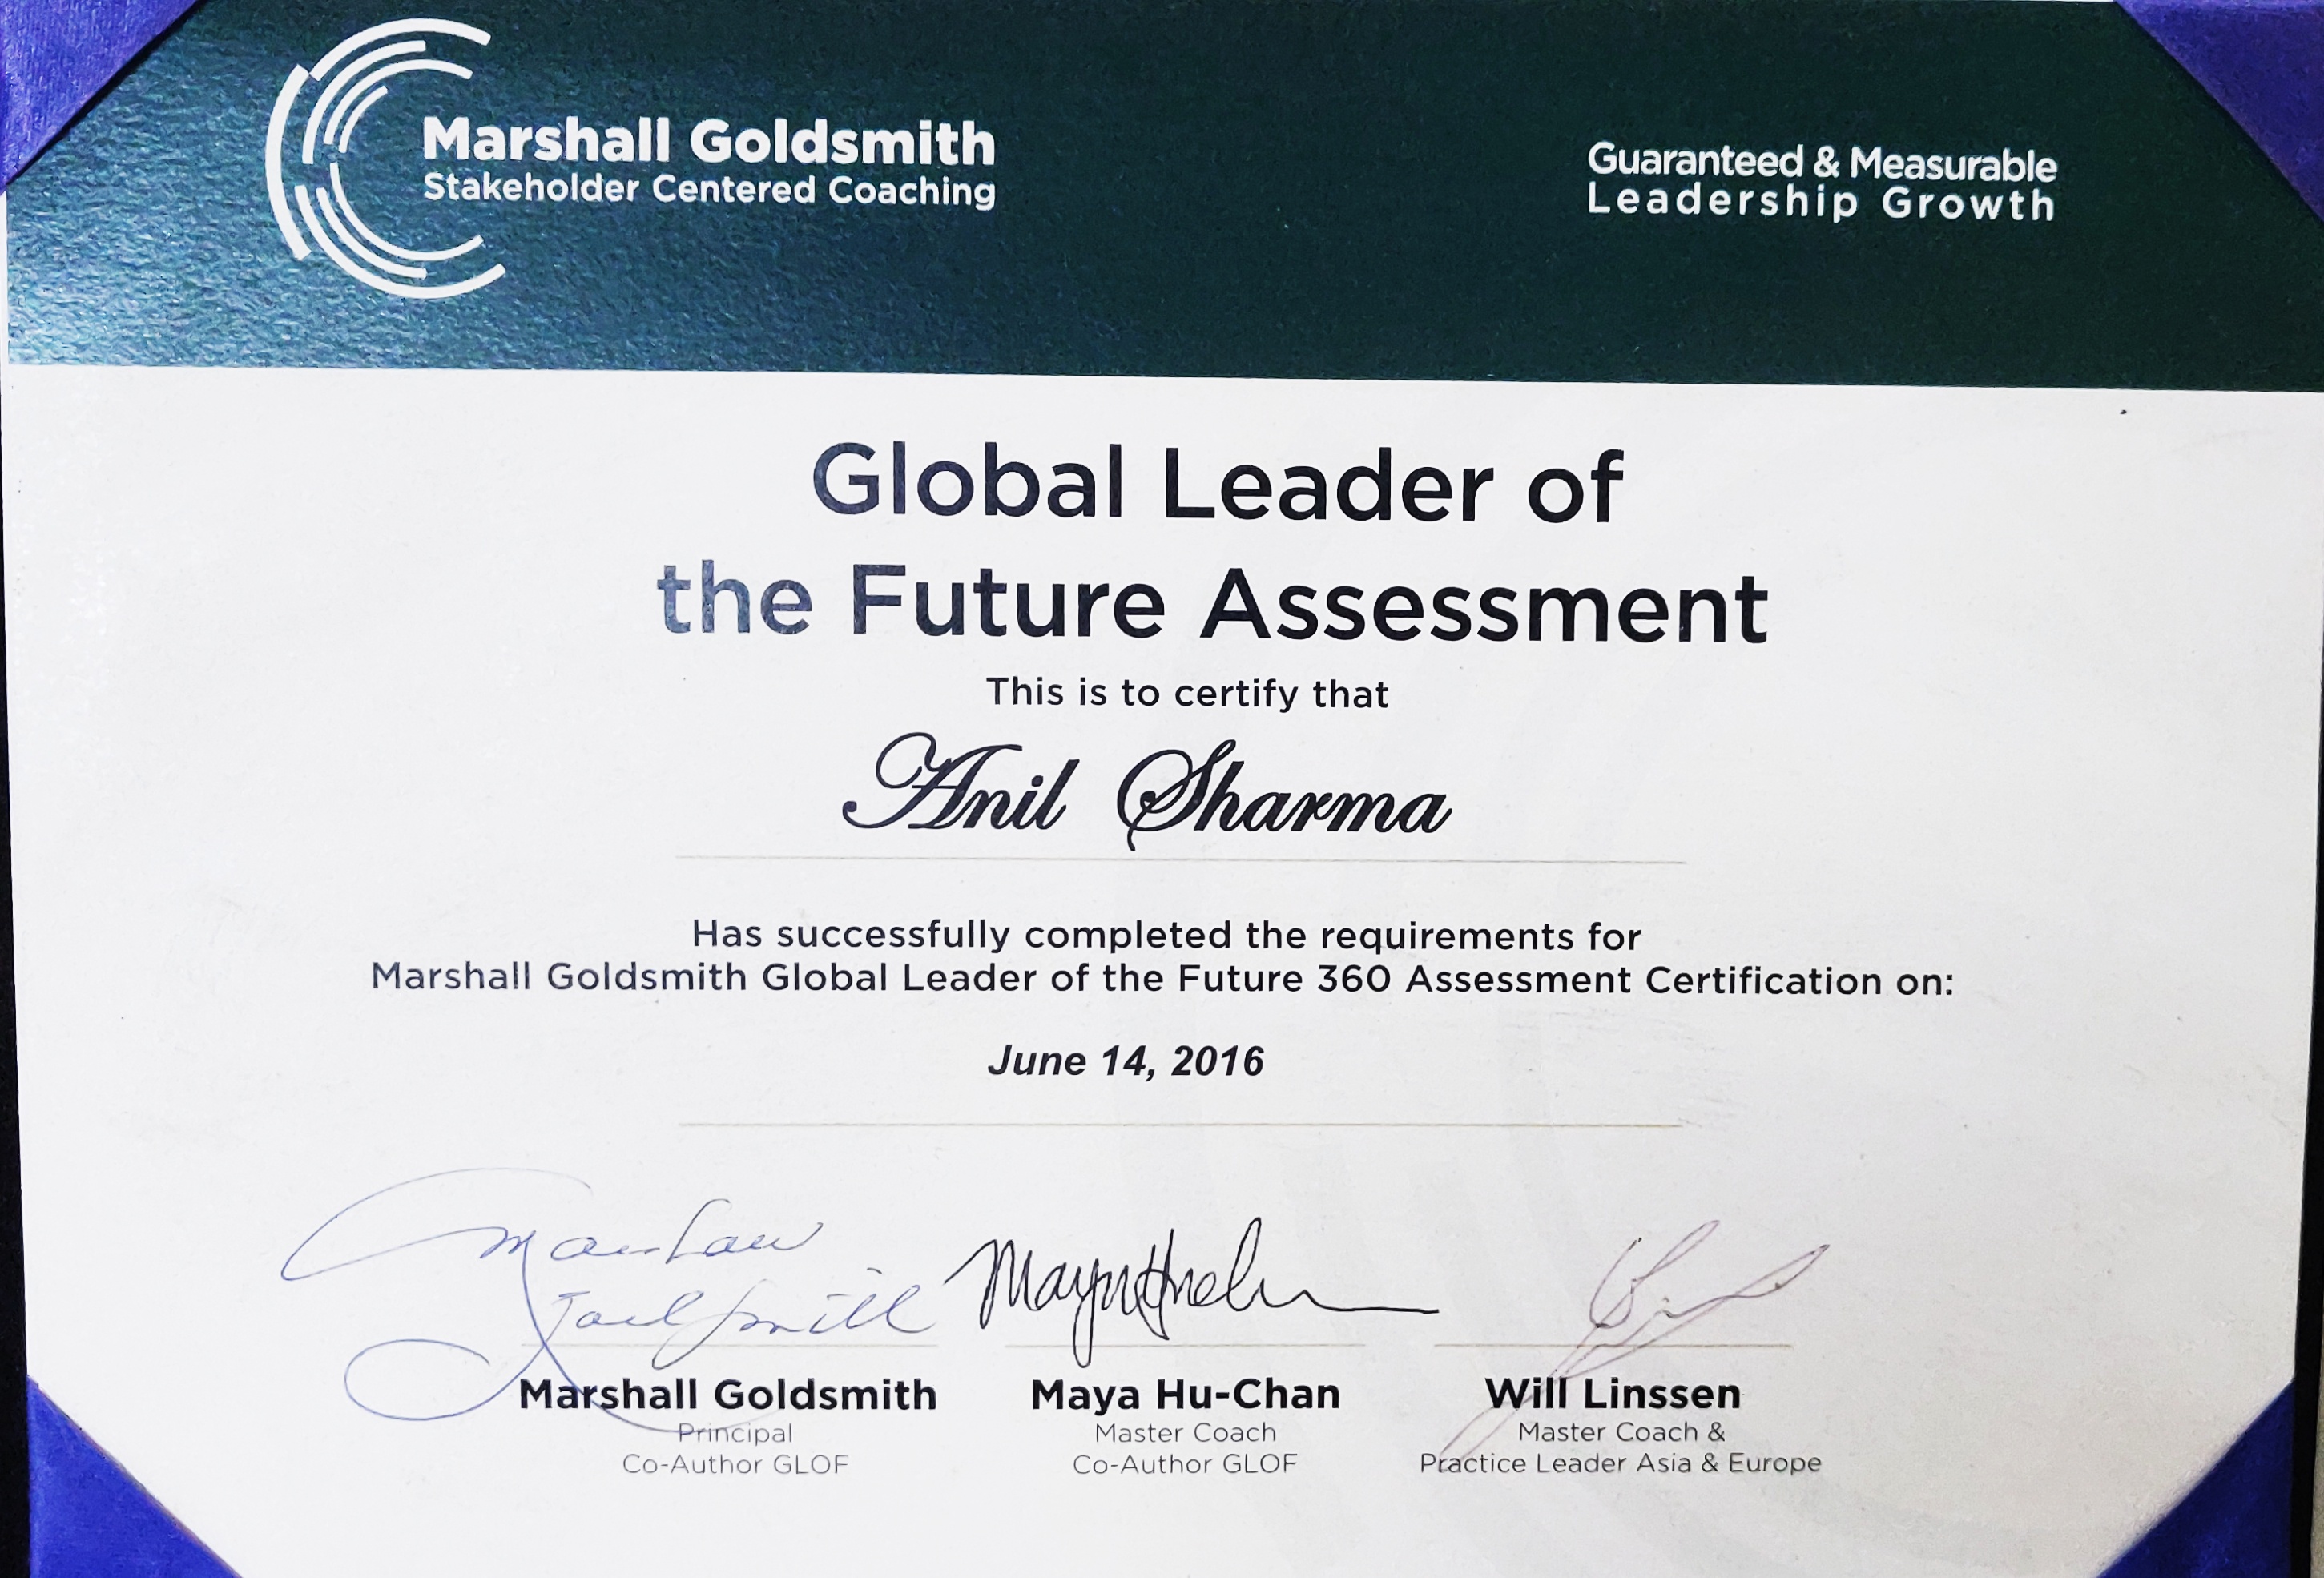 Marshall Goldsmith Global Leader of the Future Assessment Certification successfully completed by Anil Sharma